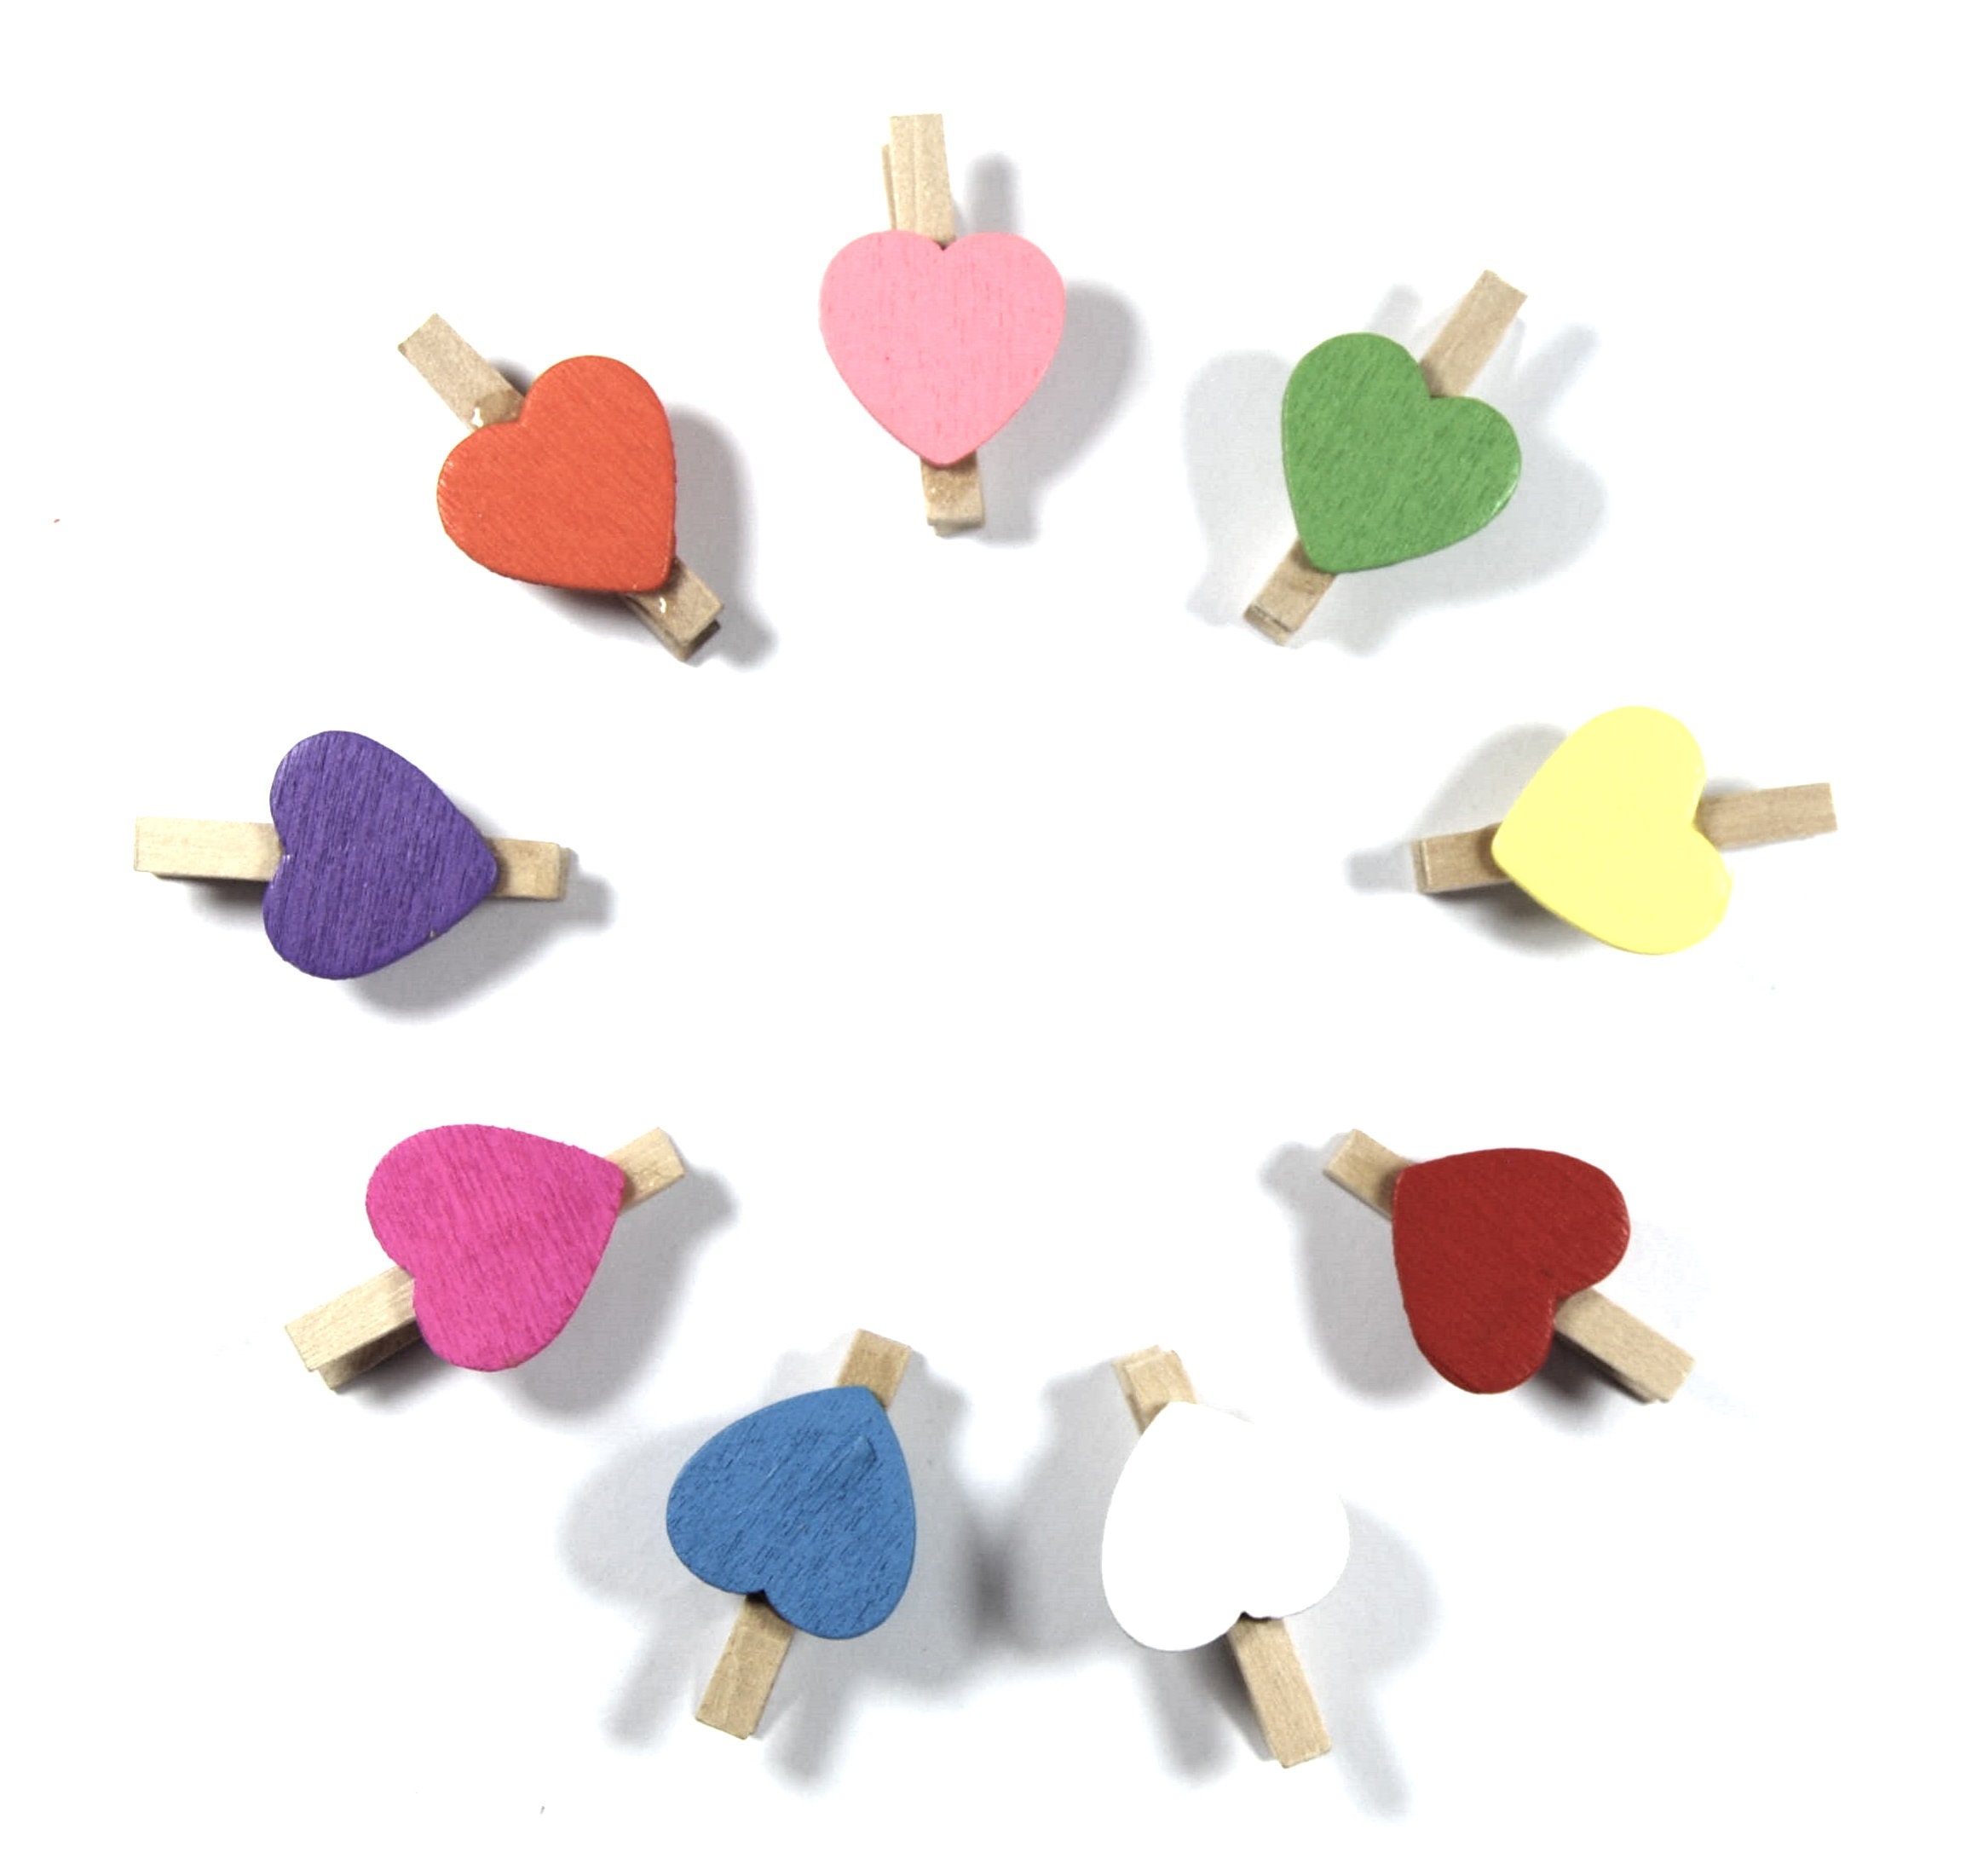 21 COLOURS TO CHOOSE FROM WHITE WOODEN CRAFT PEGS WITH COLOURED HEARTS 30mm